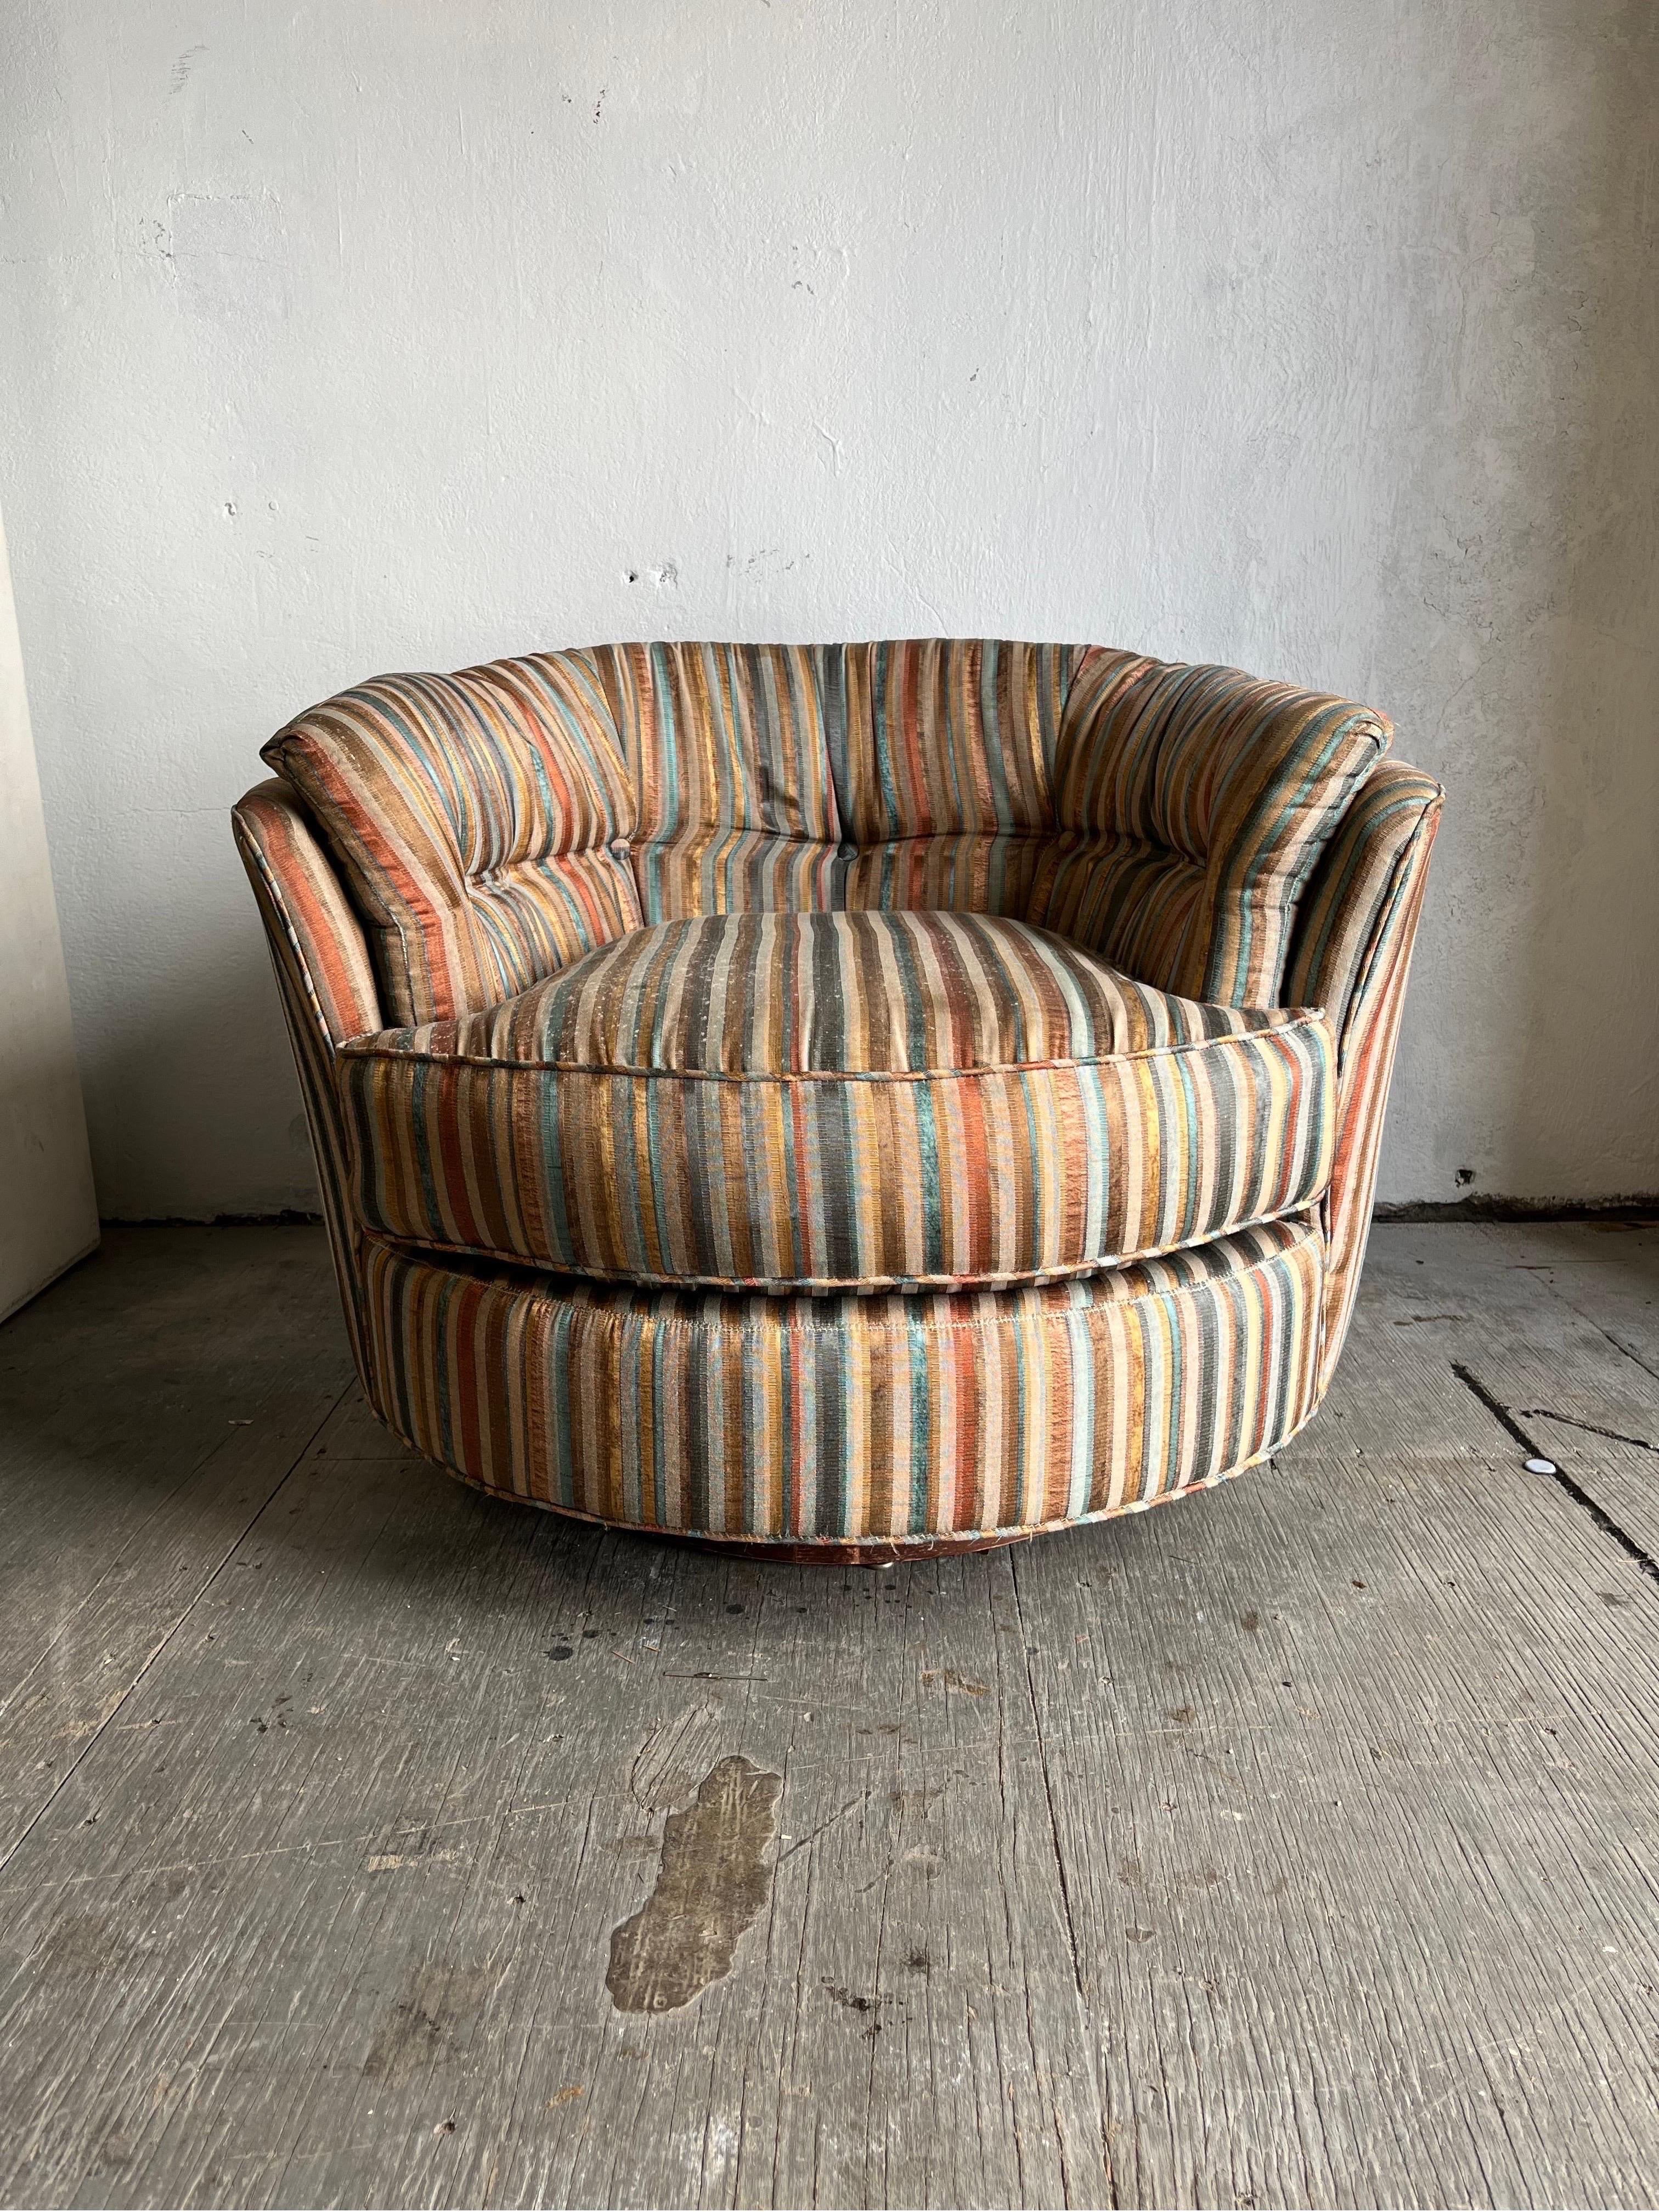 Great Barrel Swivel Club Chair in the manner of Milo Baughman. Striped upholstery in period colors. Plush cushions and sits on a wood base. 
Curbside to NYC/Philly $350